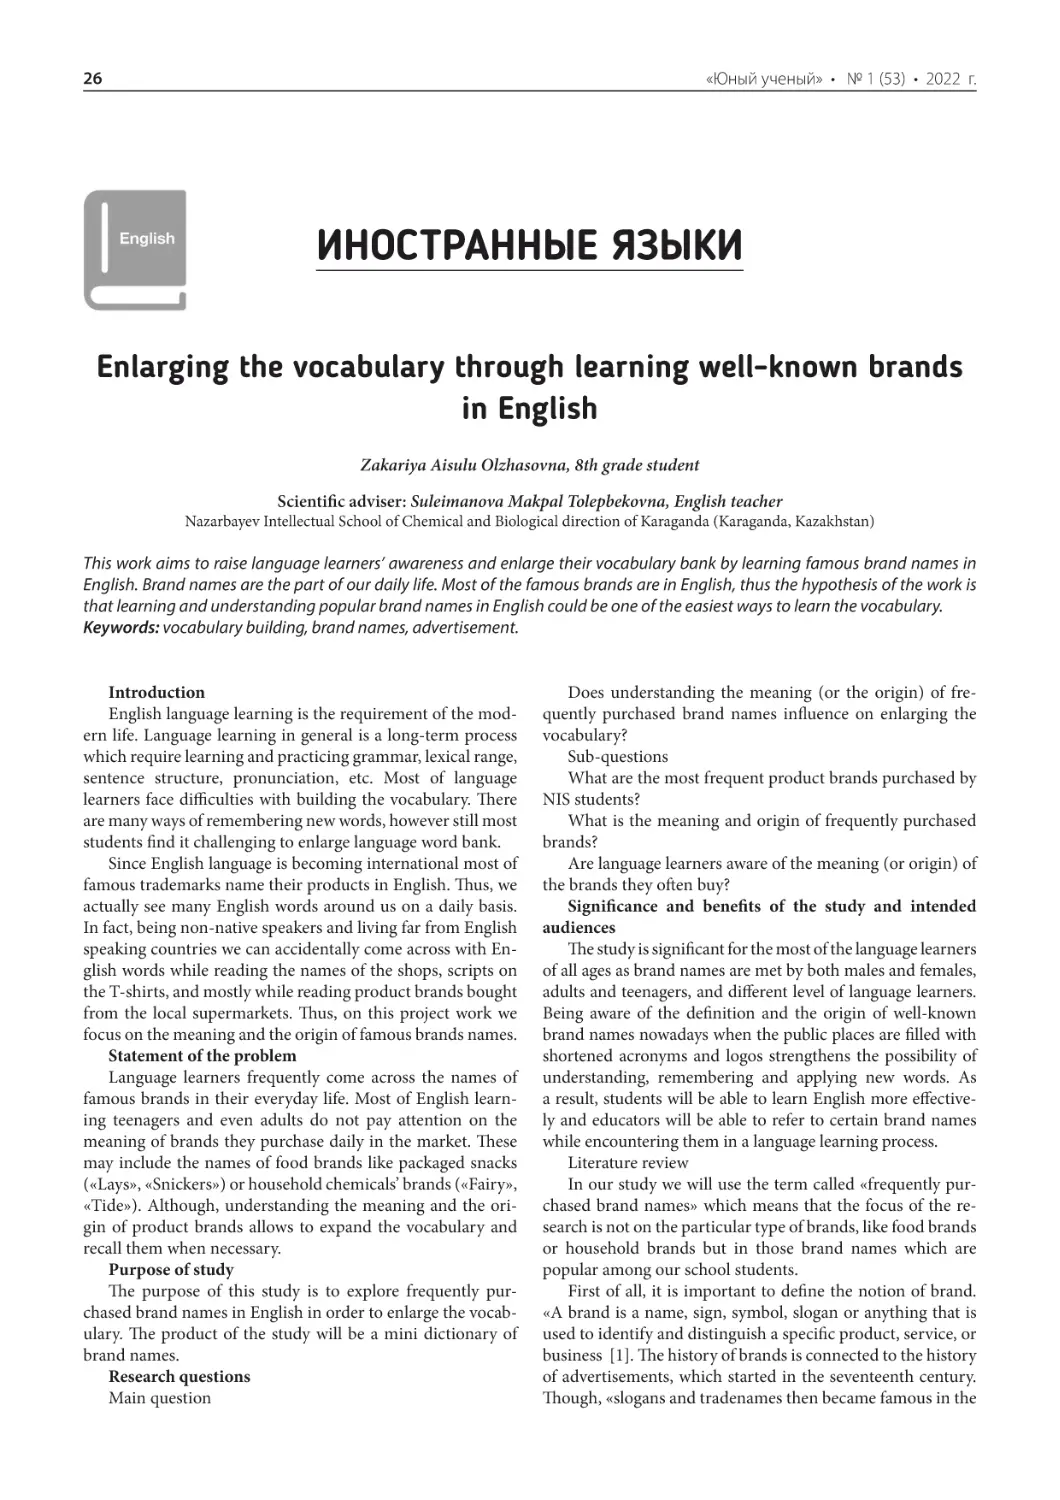 Иностранные языки
Enlarging the vocabulary through learning well-known brands in English